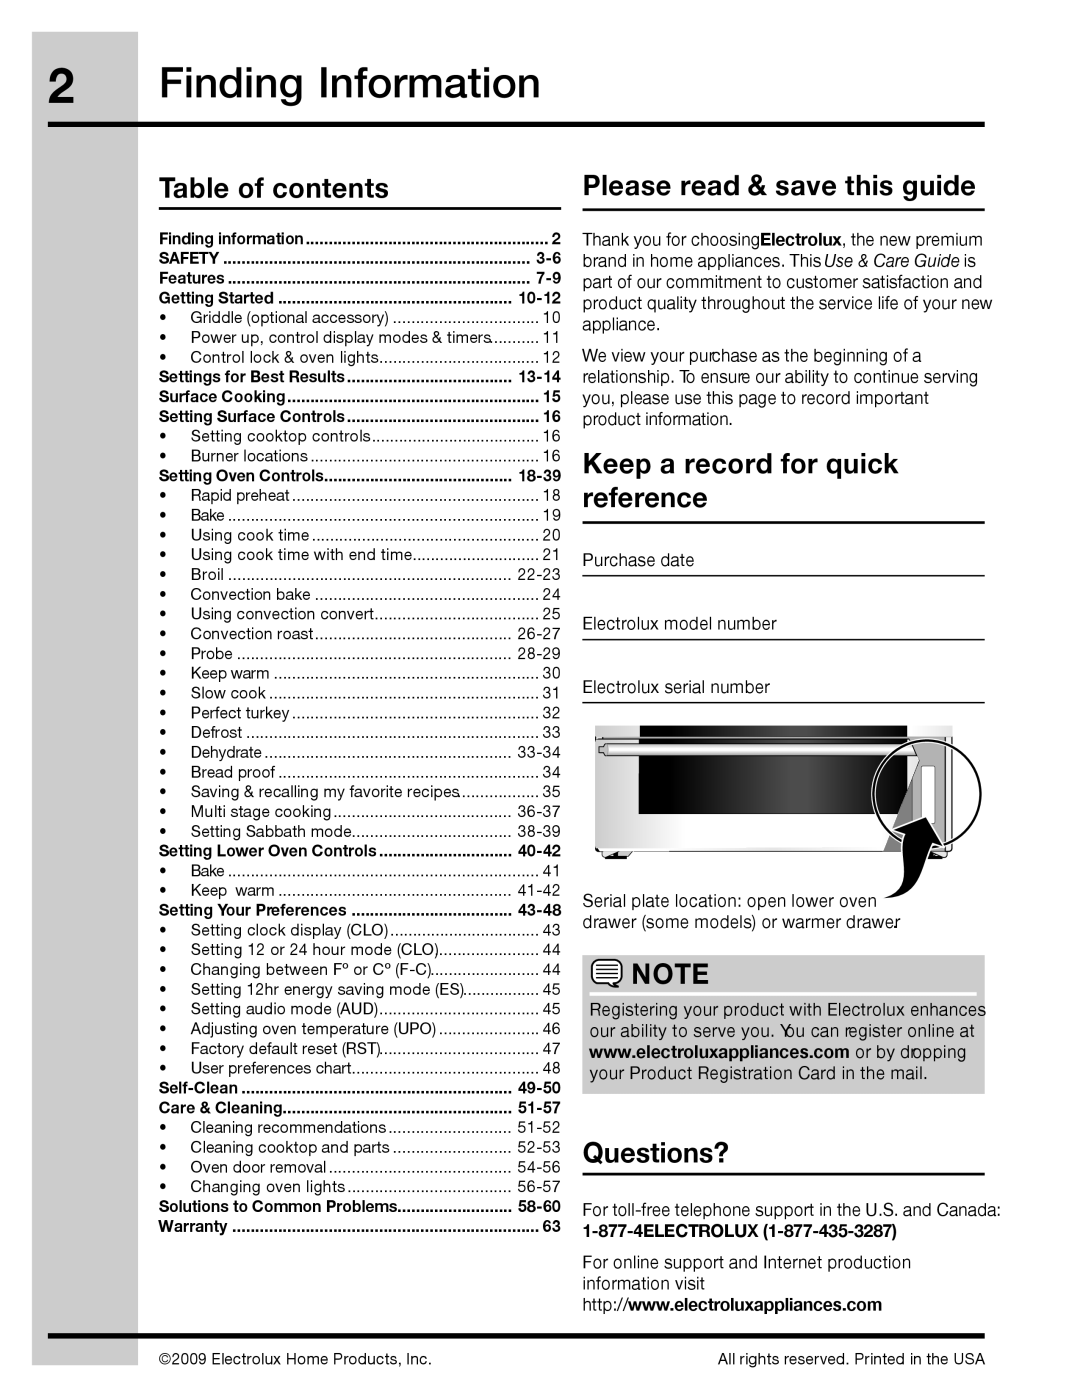 Electrolux 316471113 Finding Information, Table of contents, Please read & save this guide, Questions?, 1-877-4ELECTROLUX 